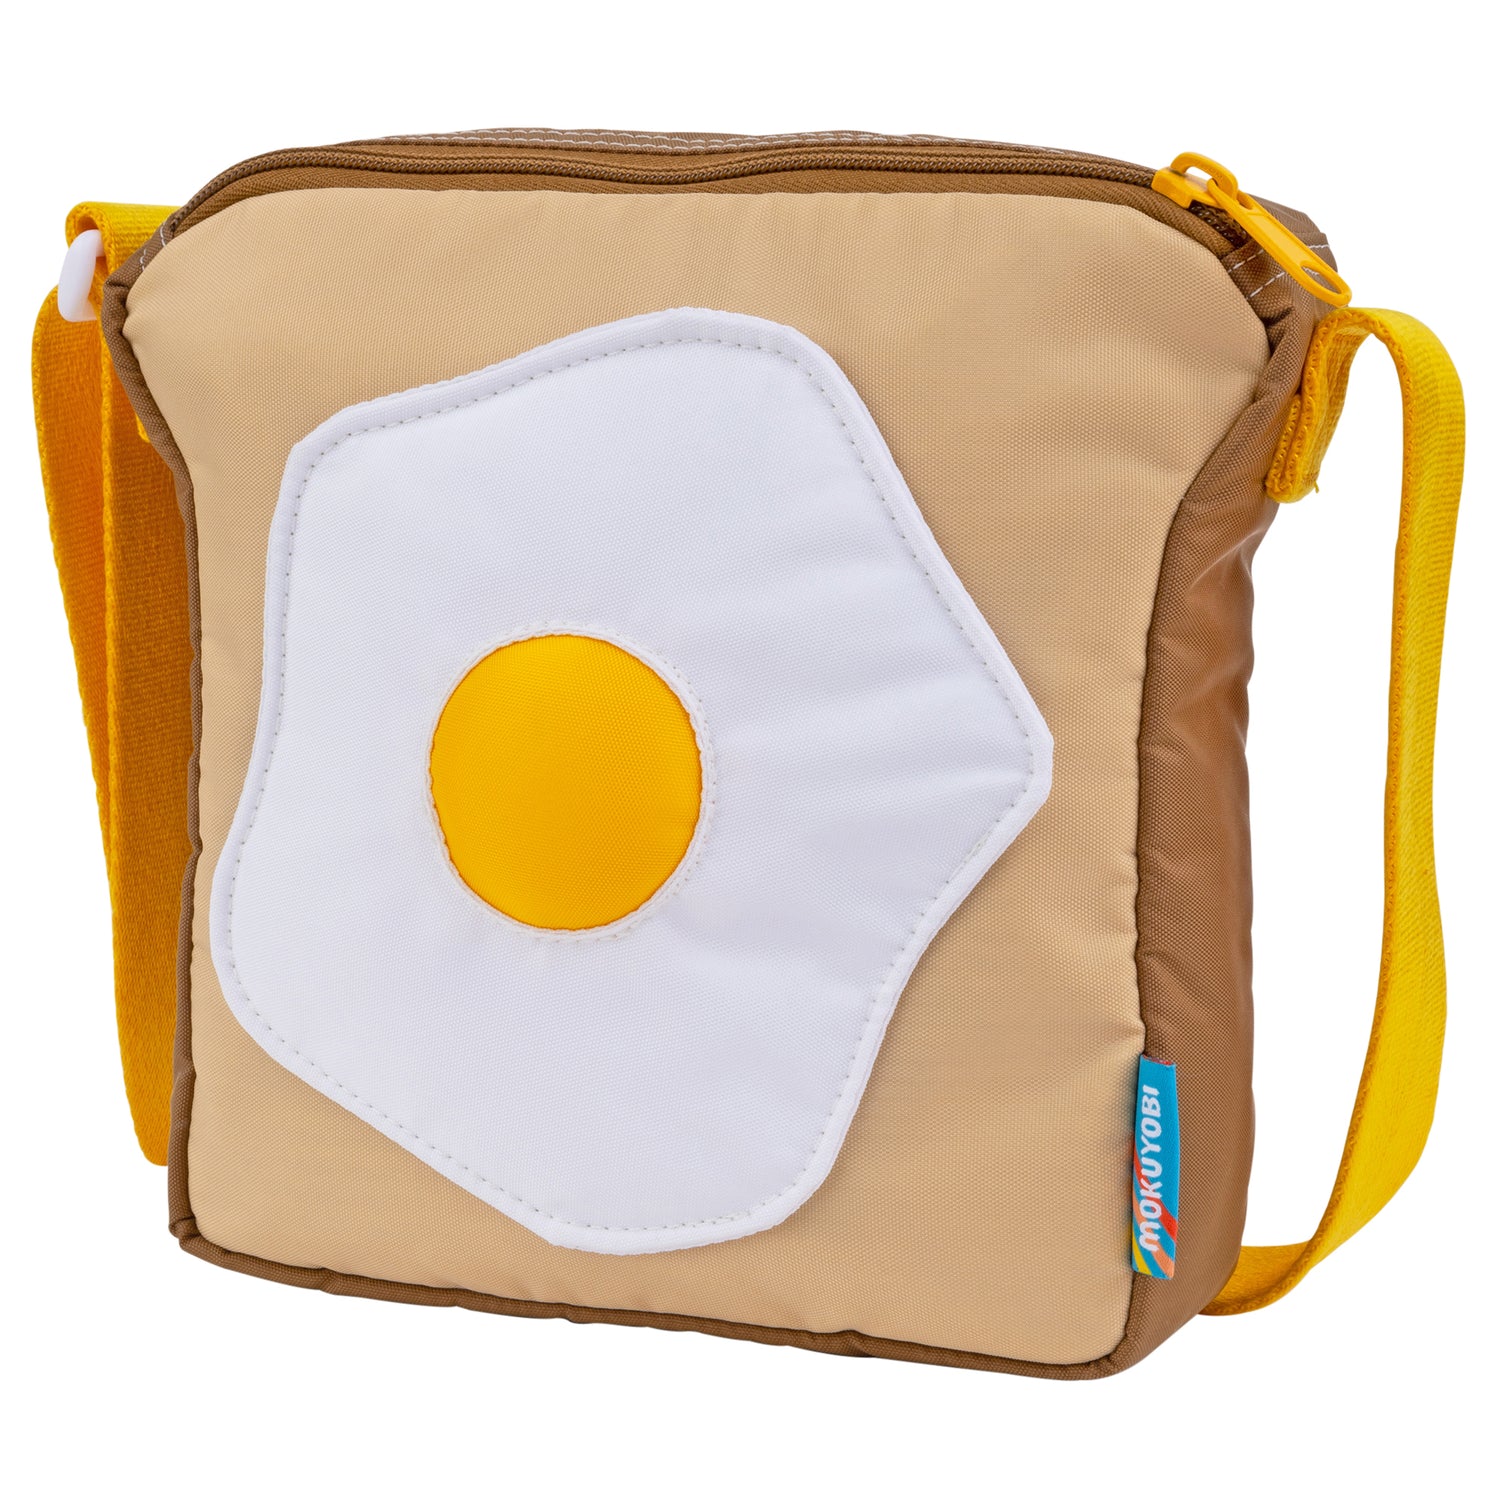 crossbody bag in the shape of toast with an egg on top.